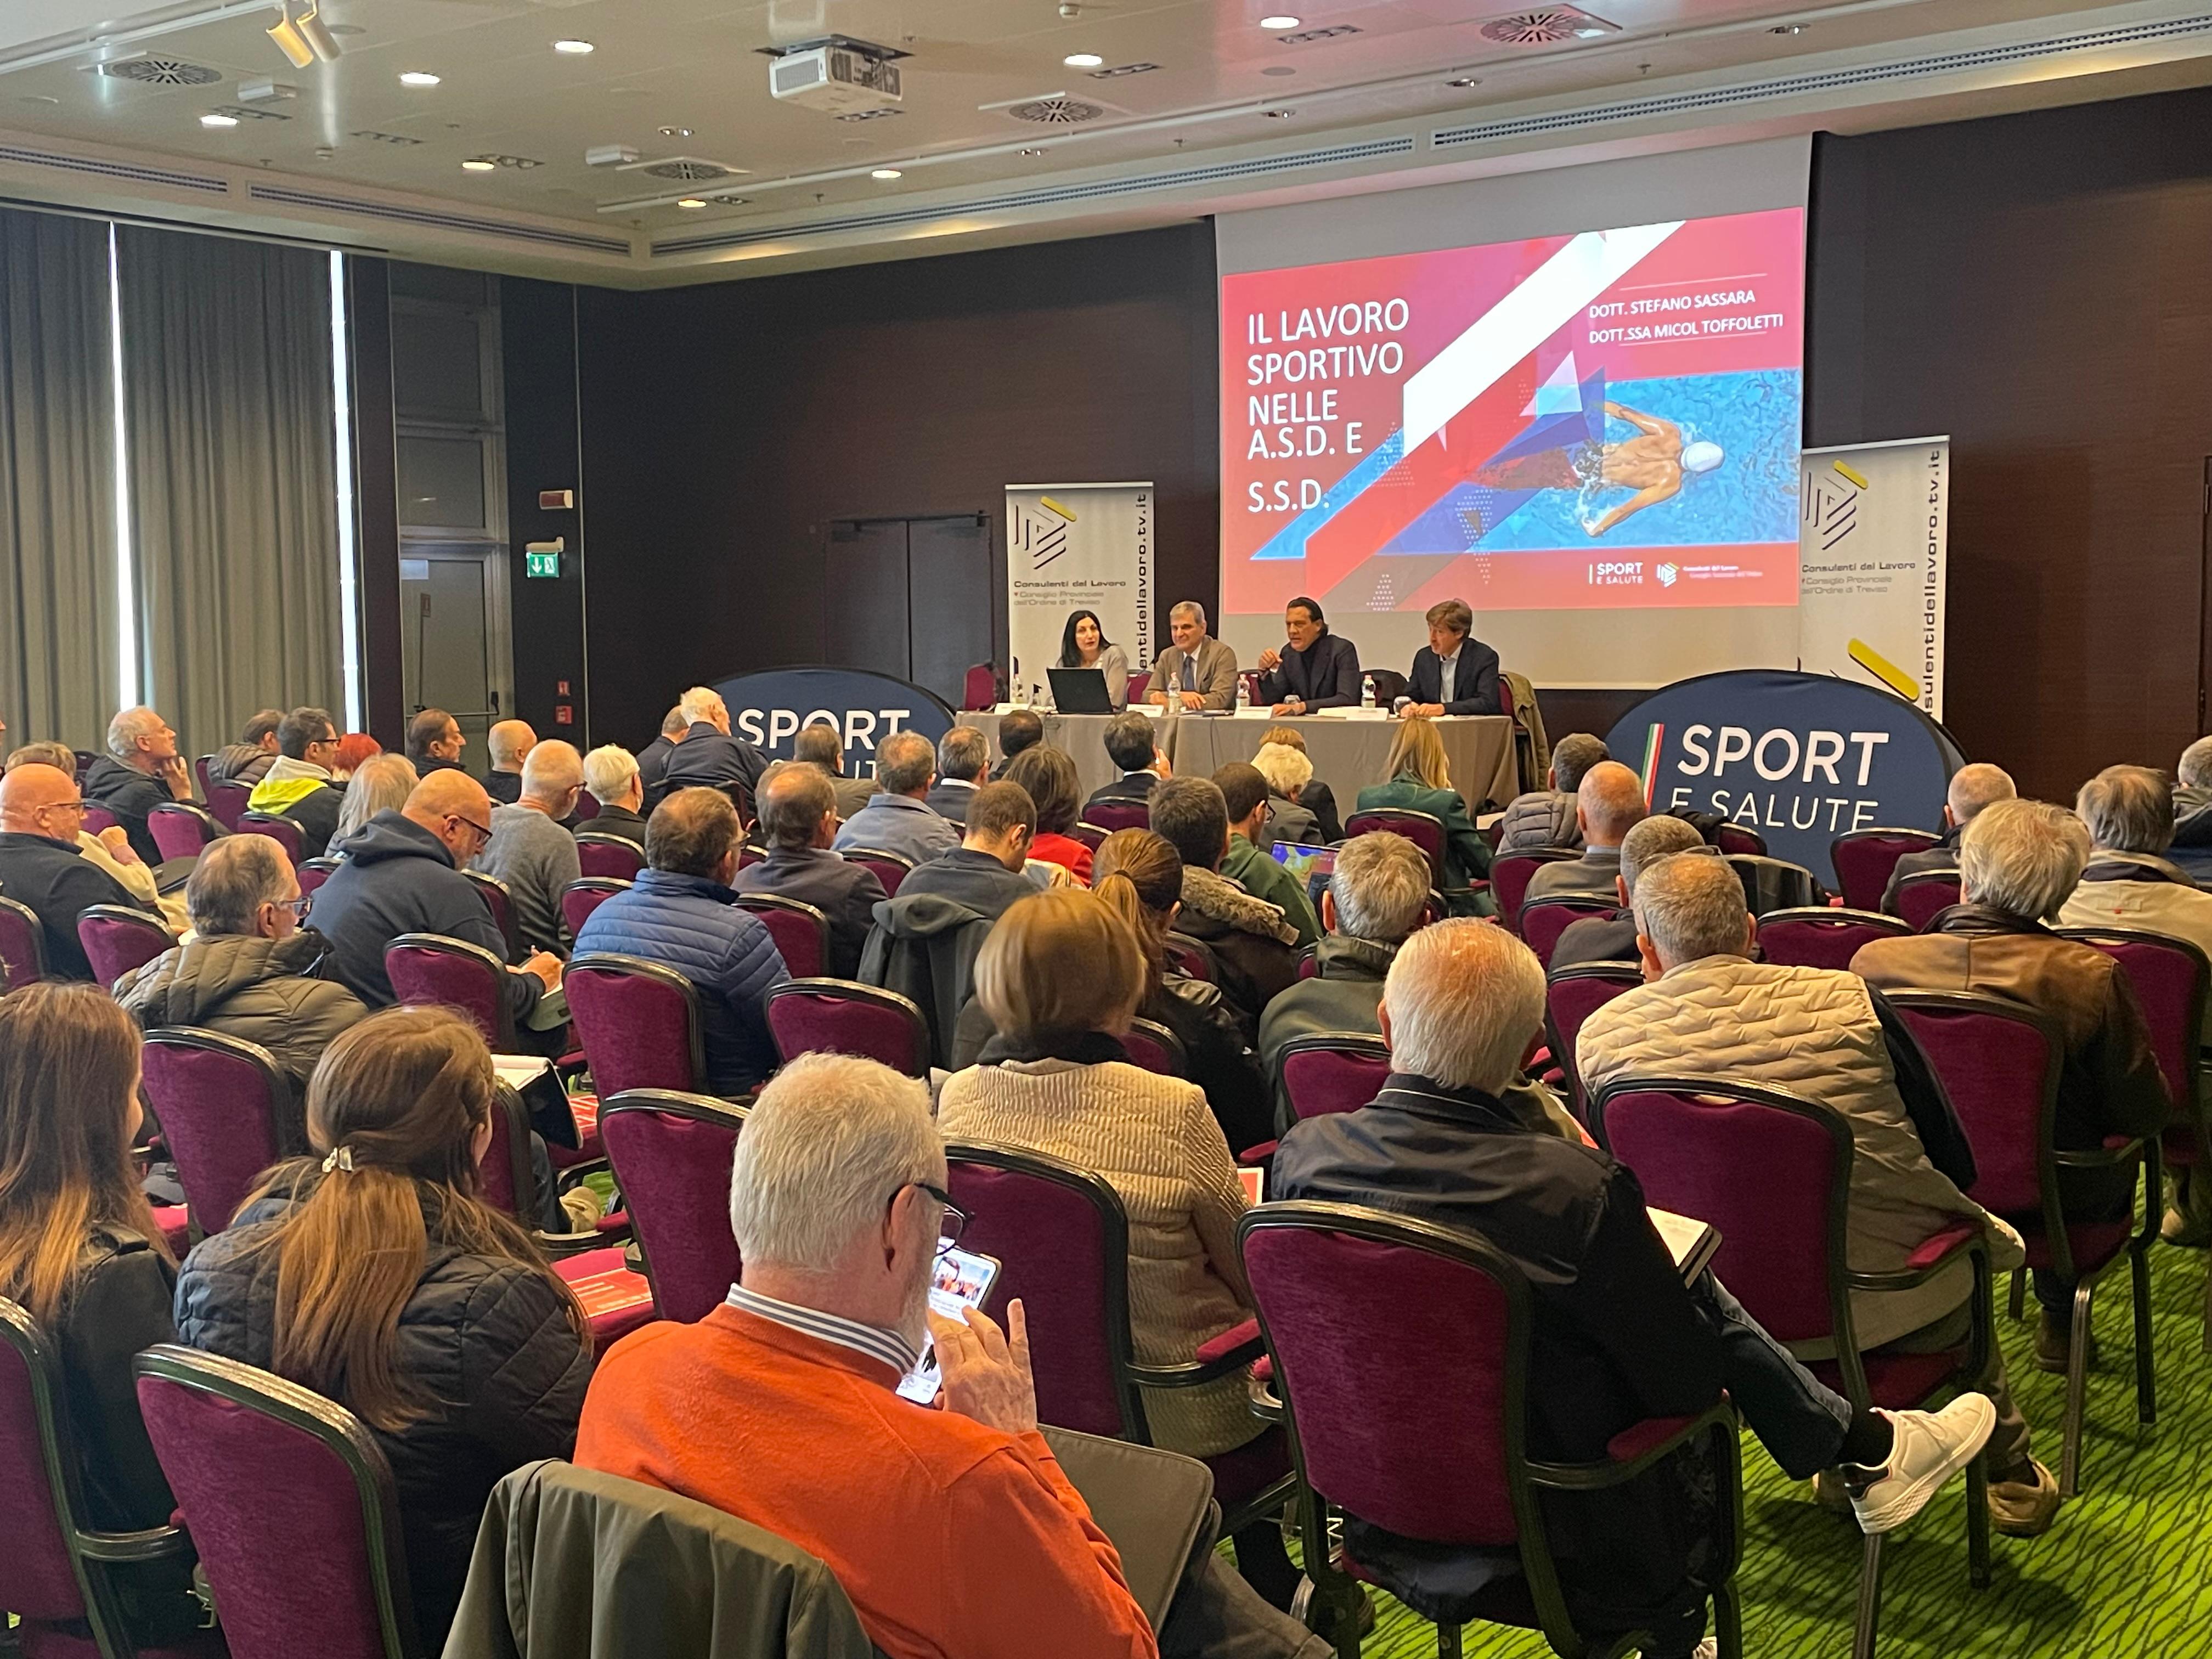 In Treviso over 300 people attended to discuss sports work.  Nepi Molineris: “The world changes, let’s bring sport into the new era”